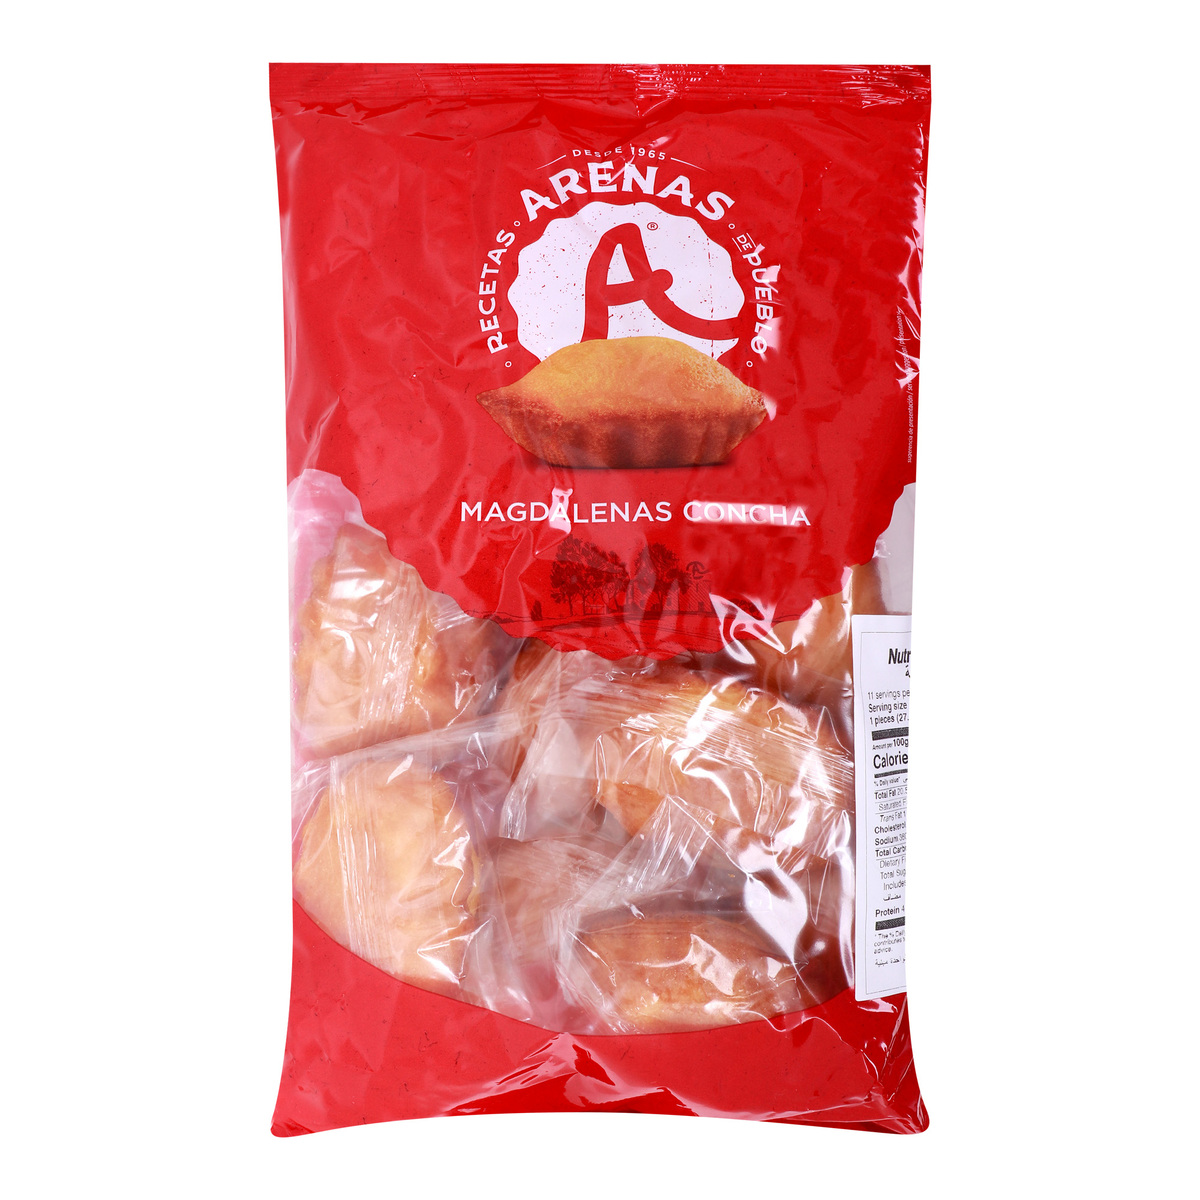 Buy Arenas Magdalenas Concha, 300 g Online at Best Price | Brought In Cakes | Lulu Kuwait in Kuwait